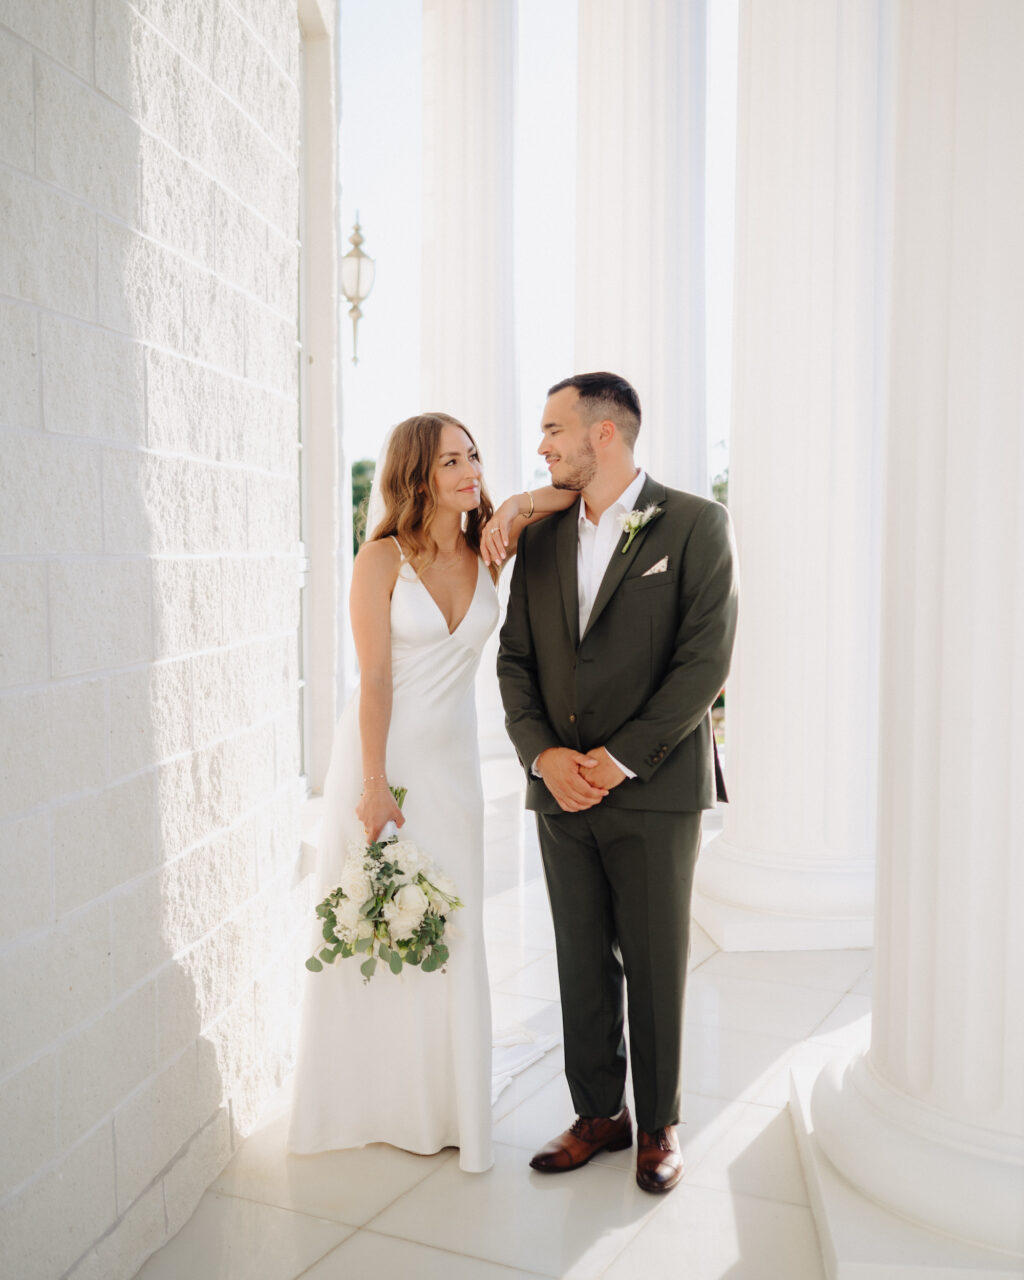 Intimate Bride And Groom Wedding Portrait | Tampa Bay Photographer McNeile Photography